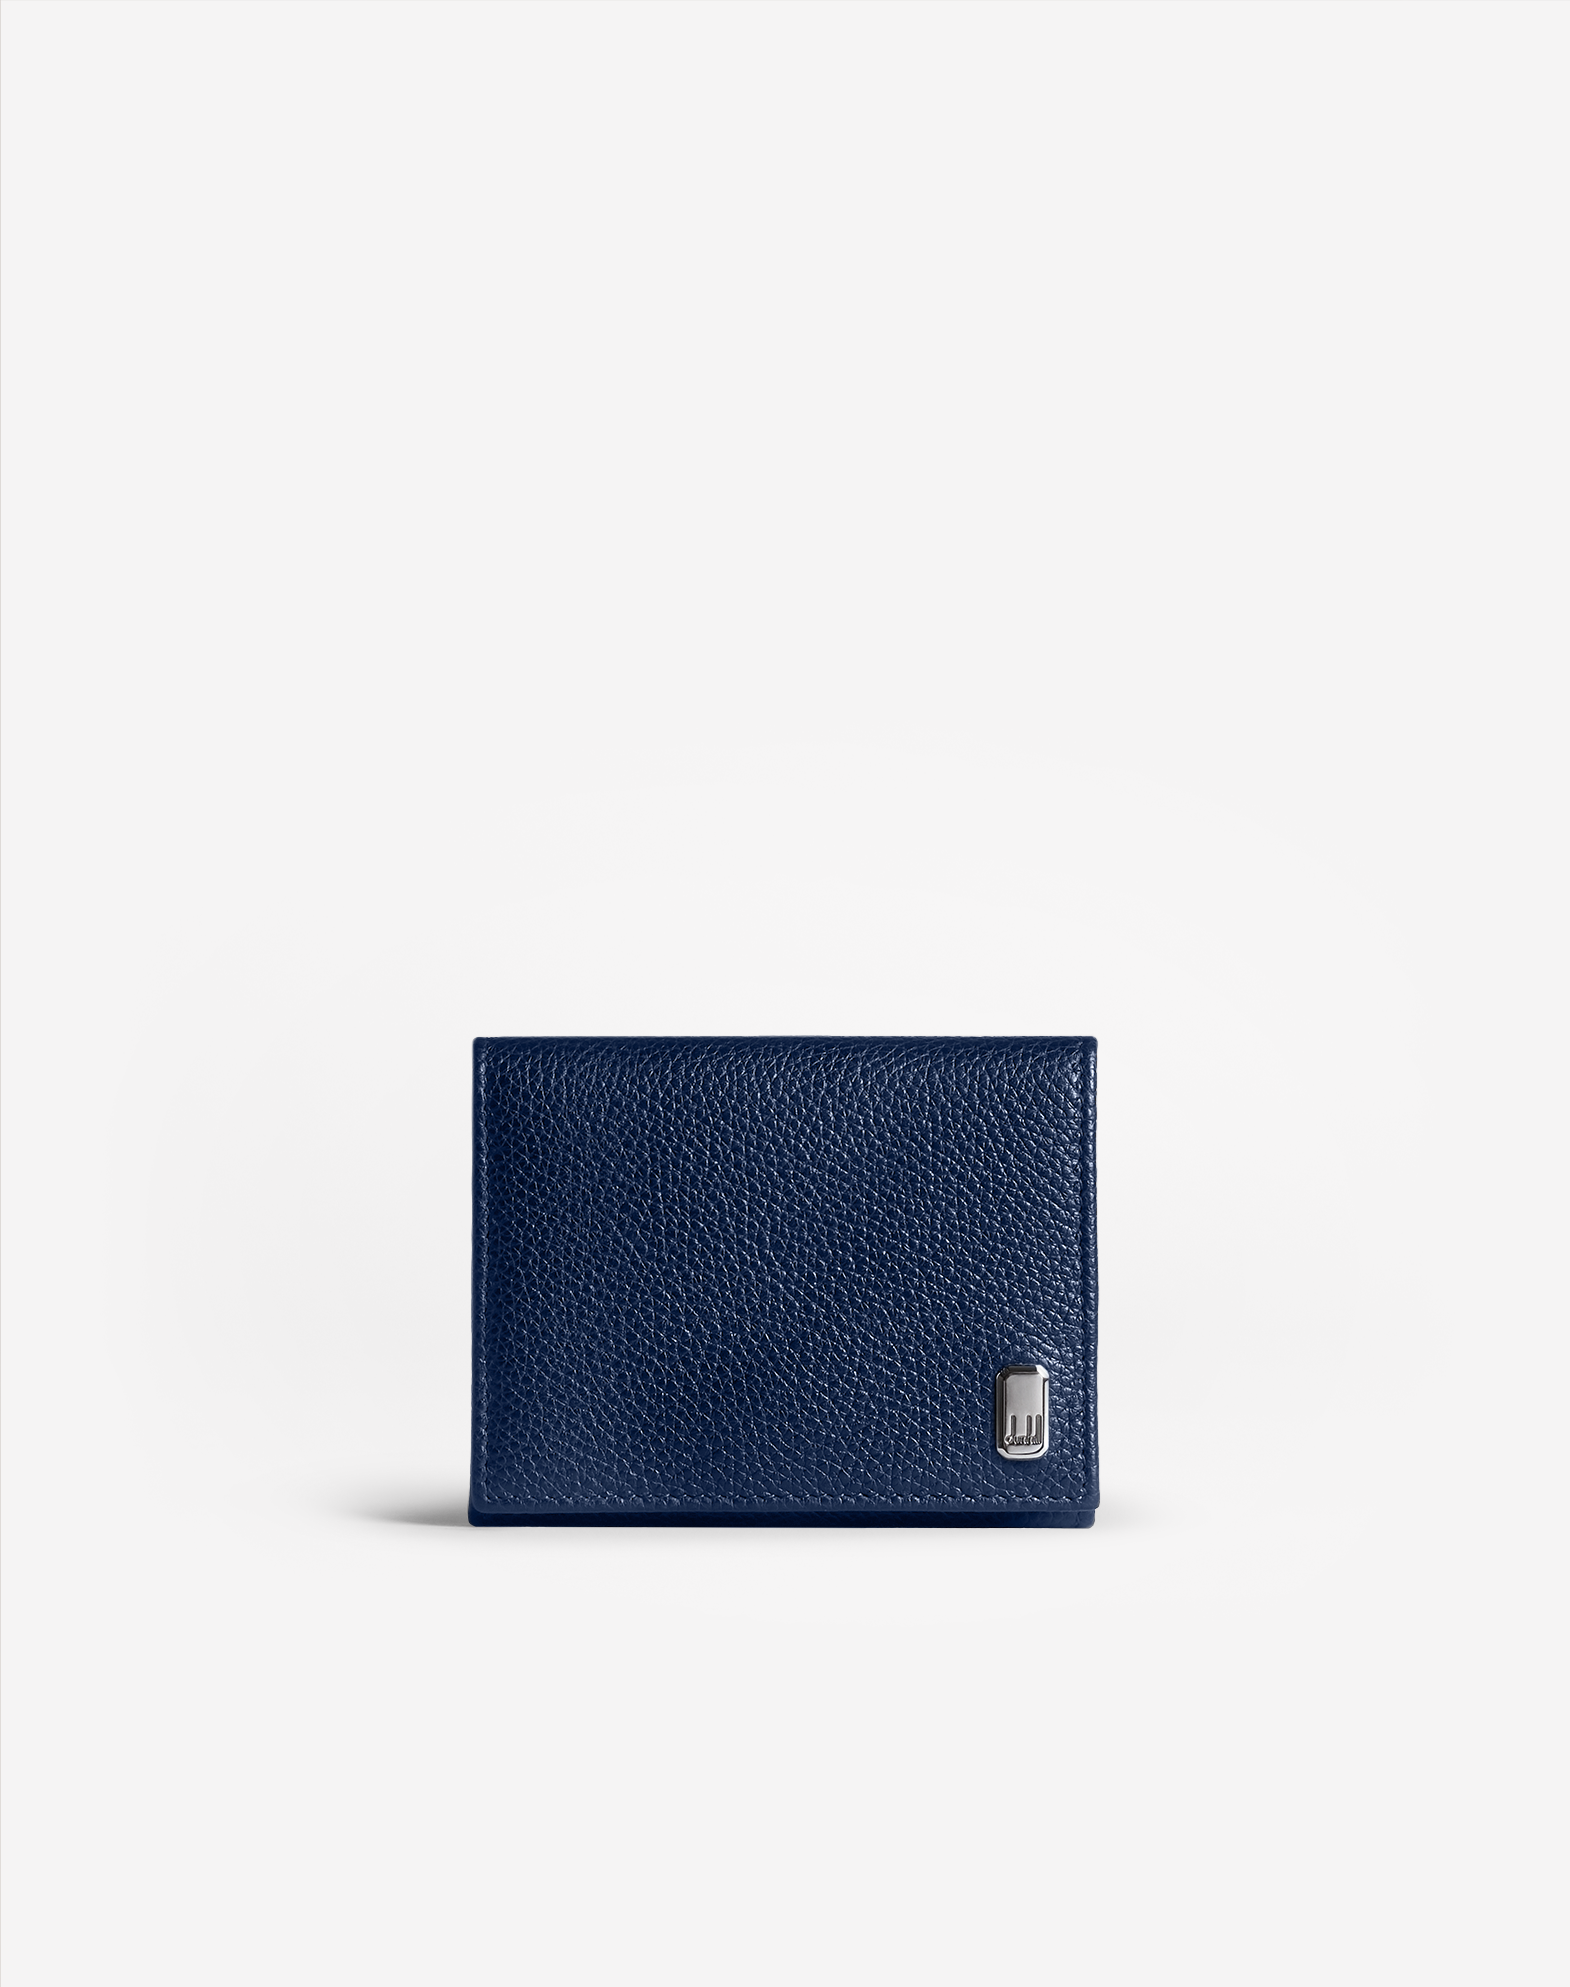 Dunhill Belgrave Coin Purse In Ink